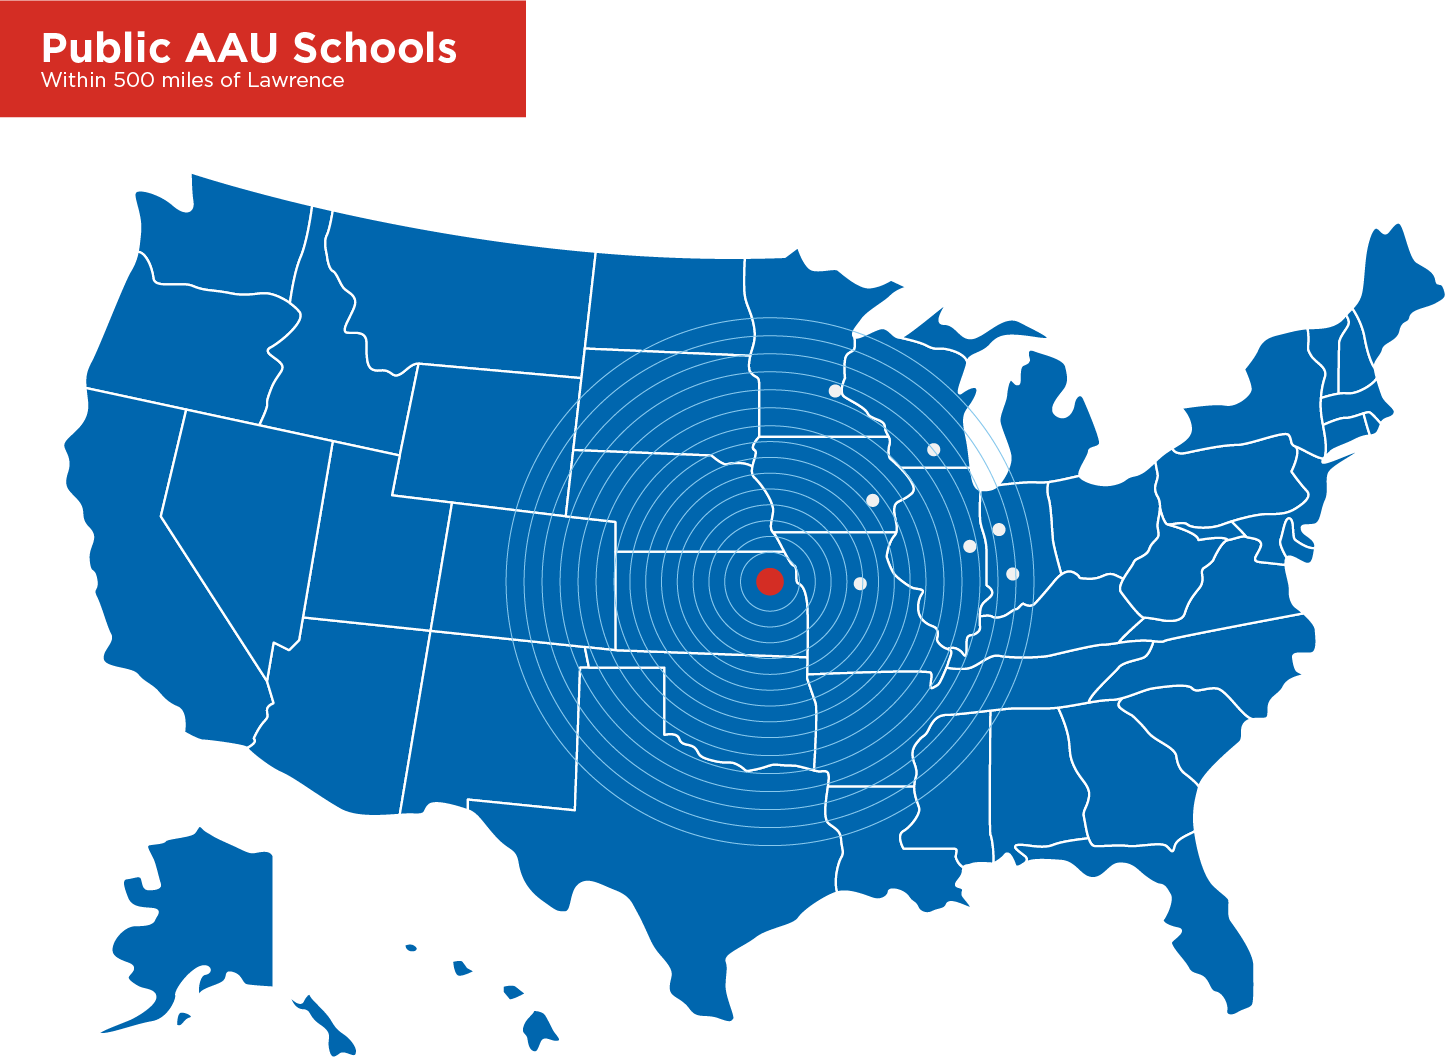 A map of the United States and the locations of AAU schools within 300 miles of Lawrence, KS